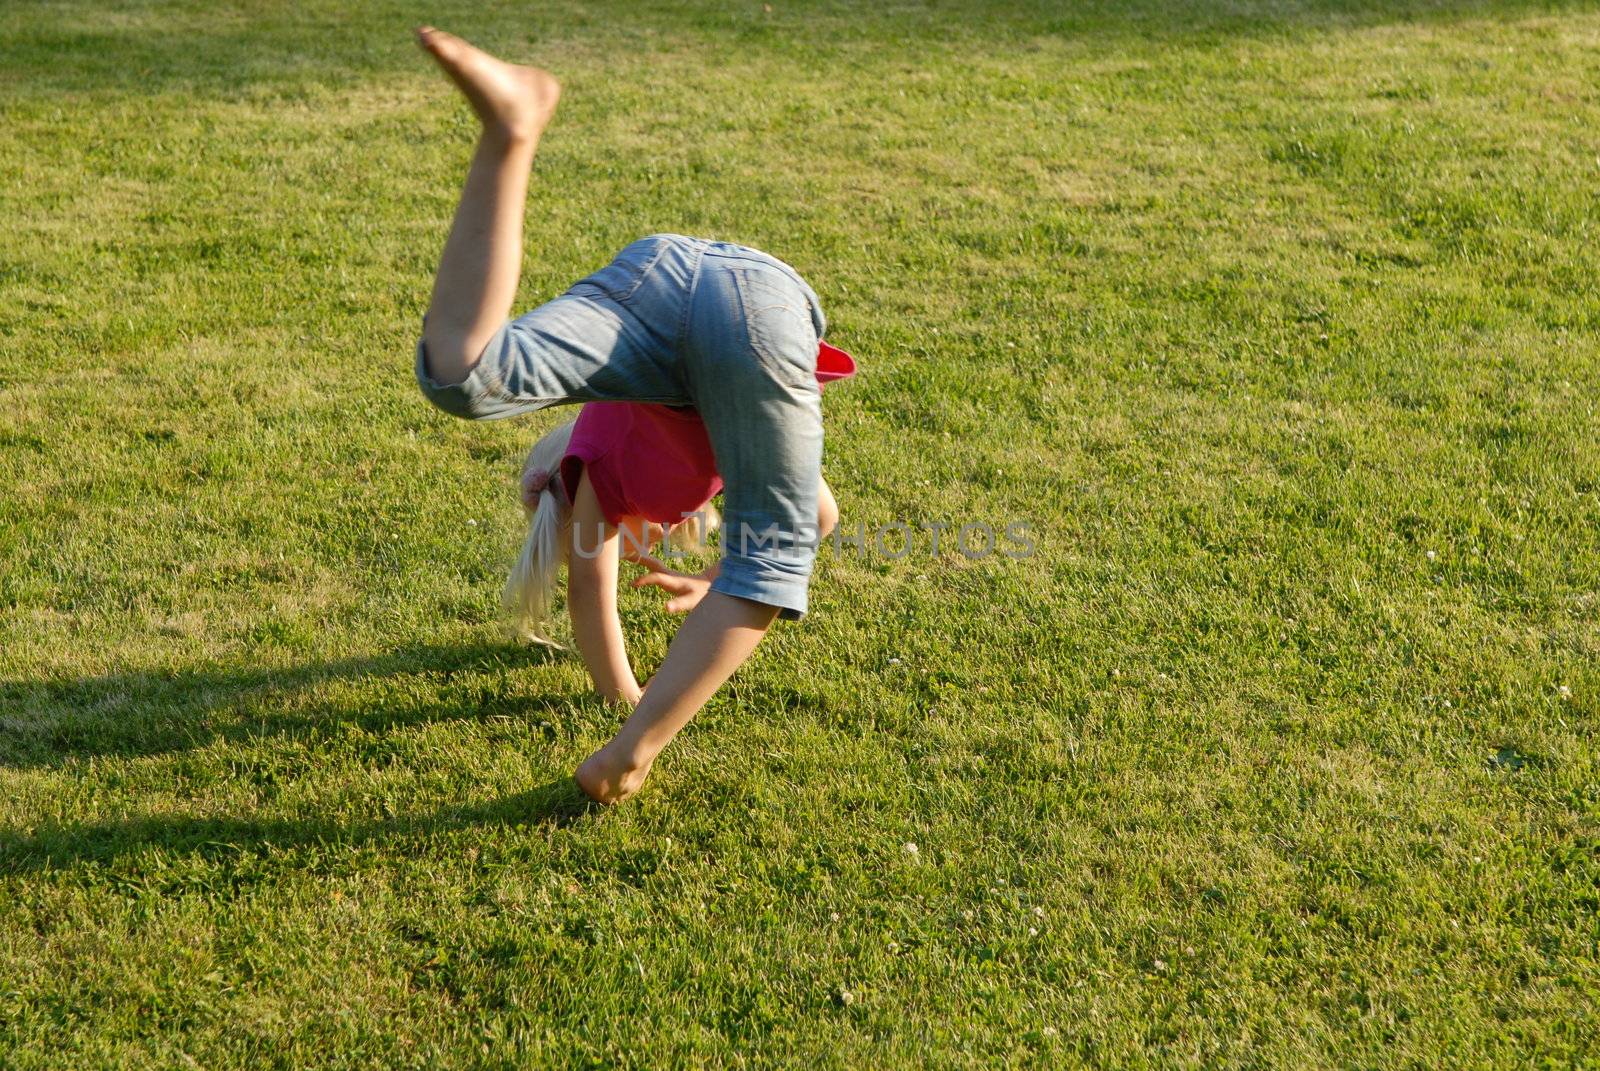 Girl doing gymnastics in the garden. Please note: No negative use allowed